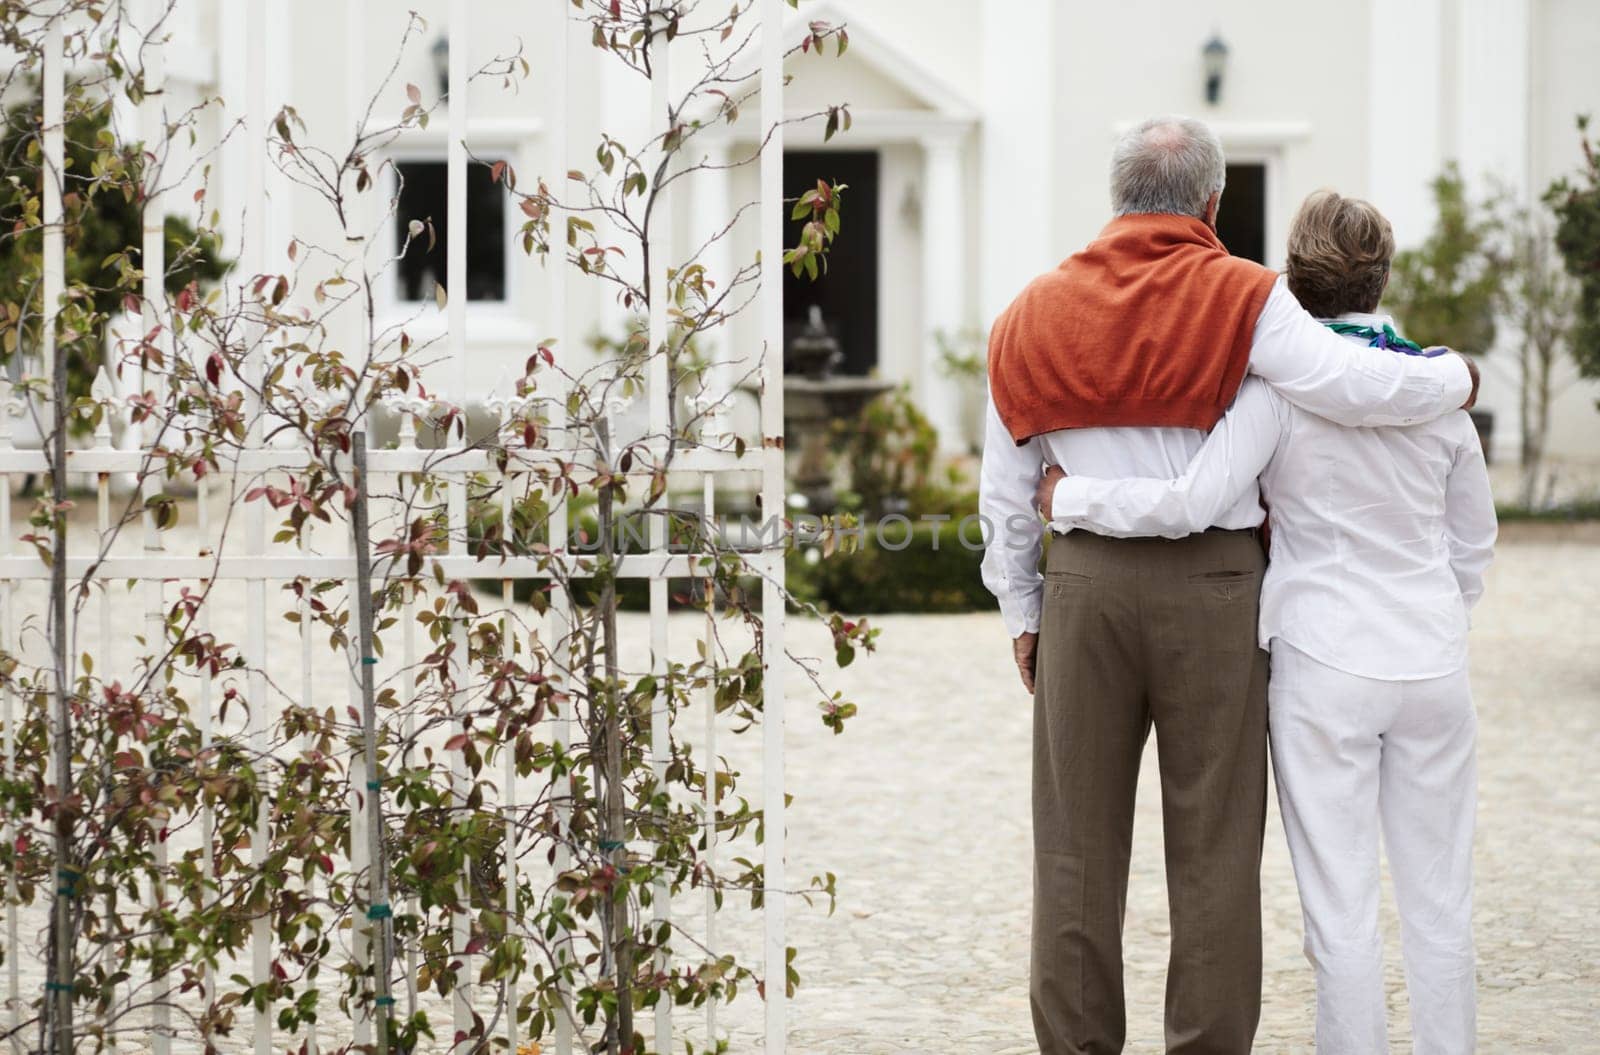 Back, hug and a senior couple at a hotel for a holiday, retirement travel and love together. Affection, nature and an elderly man and woman on a vacation at a resort or manor and hugging at the gate.